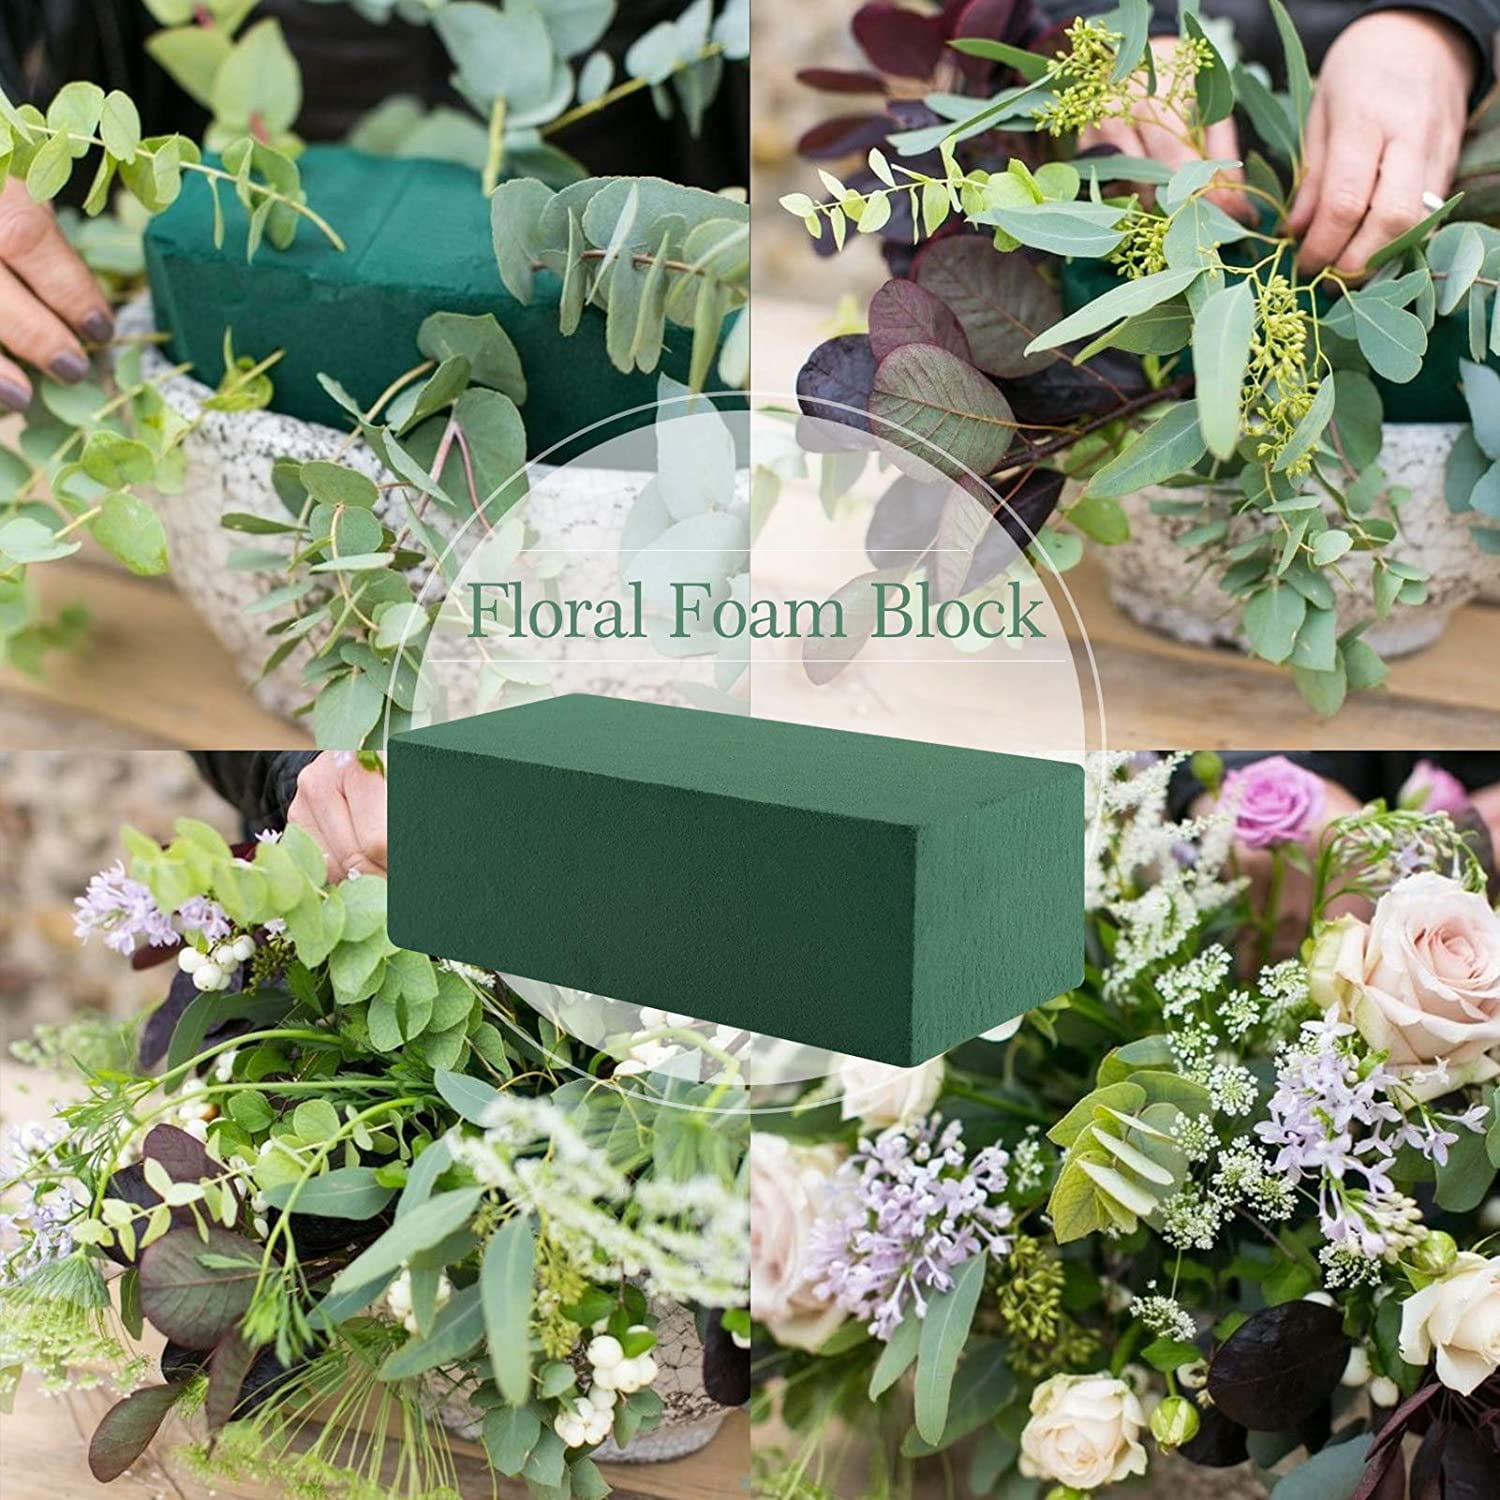 4 Pcs Floral Foam for Fresh and Artificial Flowers, Happon Wet and Dry  Floral Foam Blocks for Wedding Birthdays and Garden Decorations (Green) 